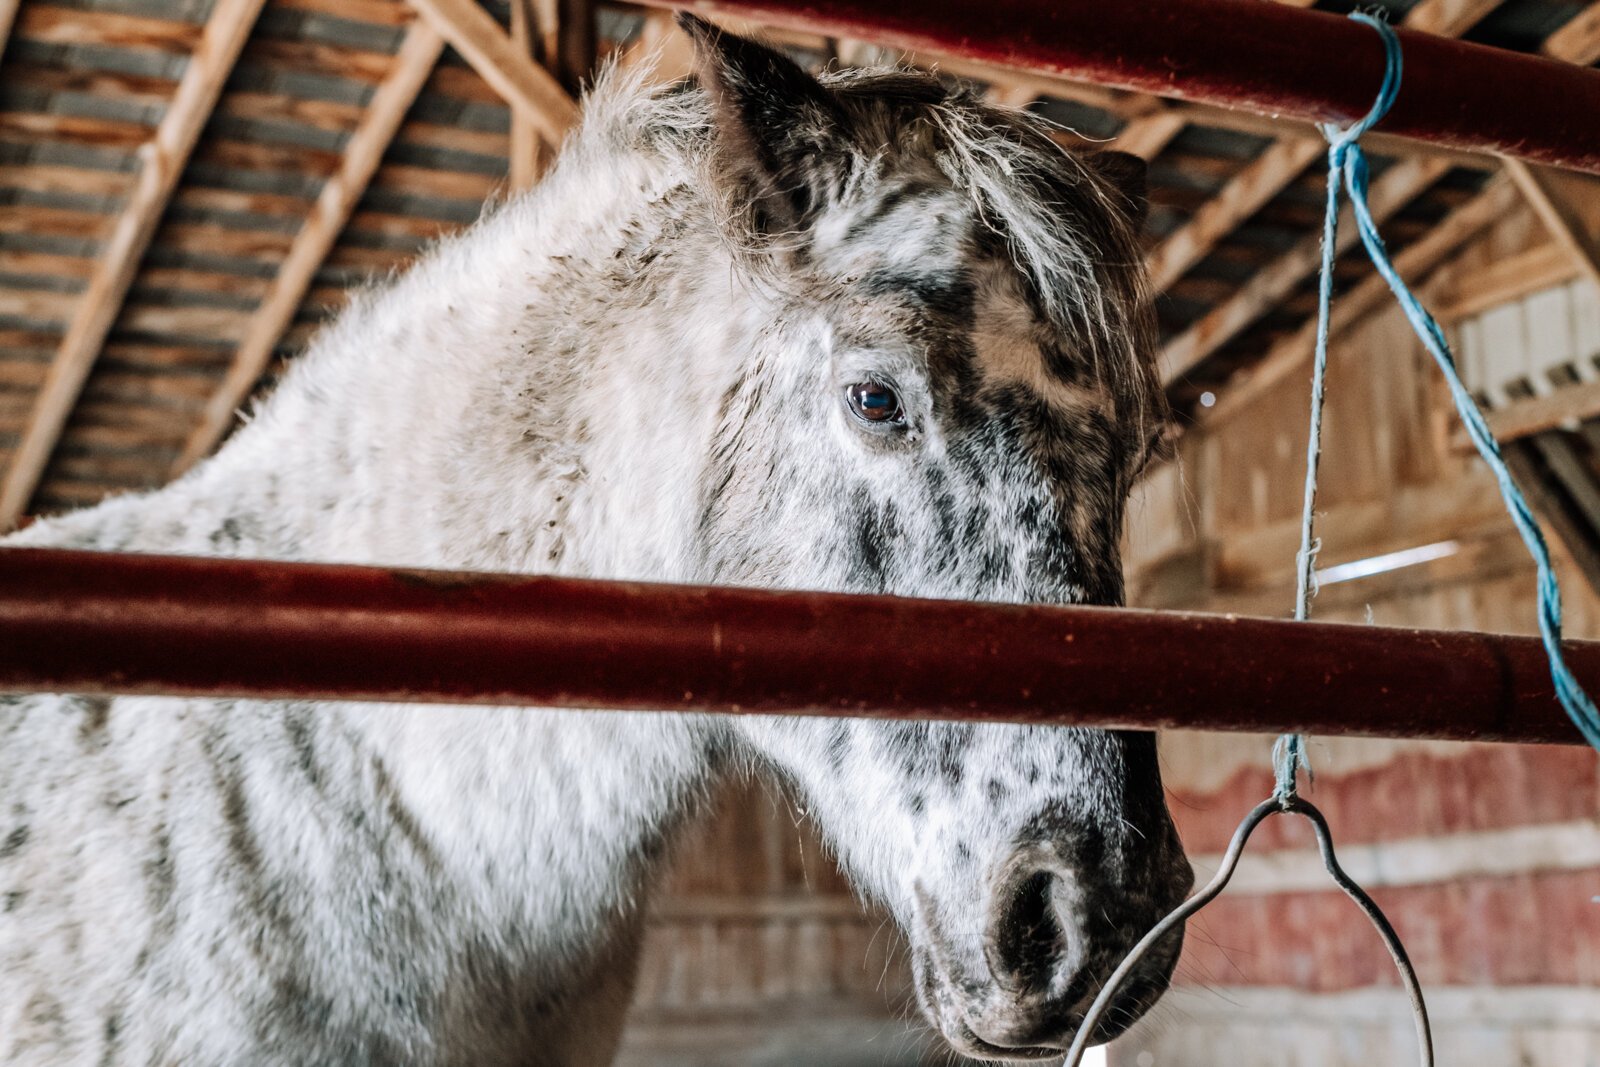 The Bailey's horse, Flash, stays inside the barn below Airbnb guests.